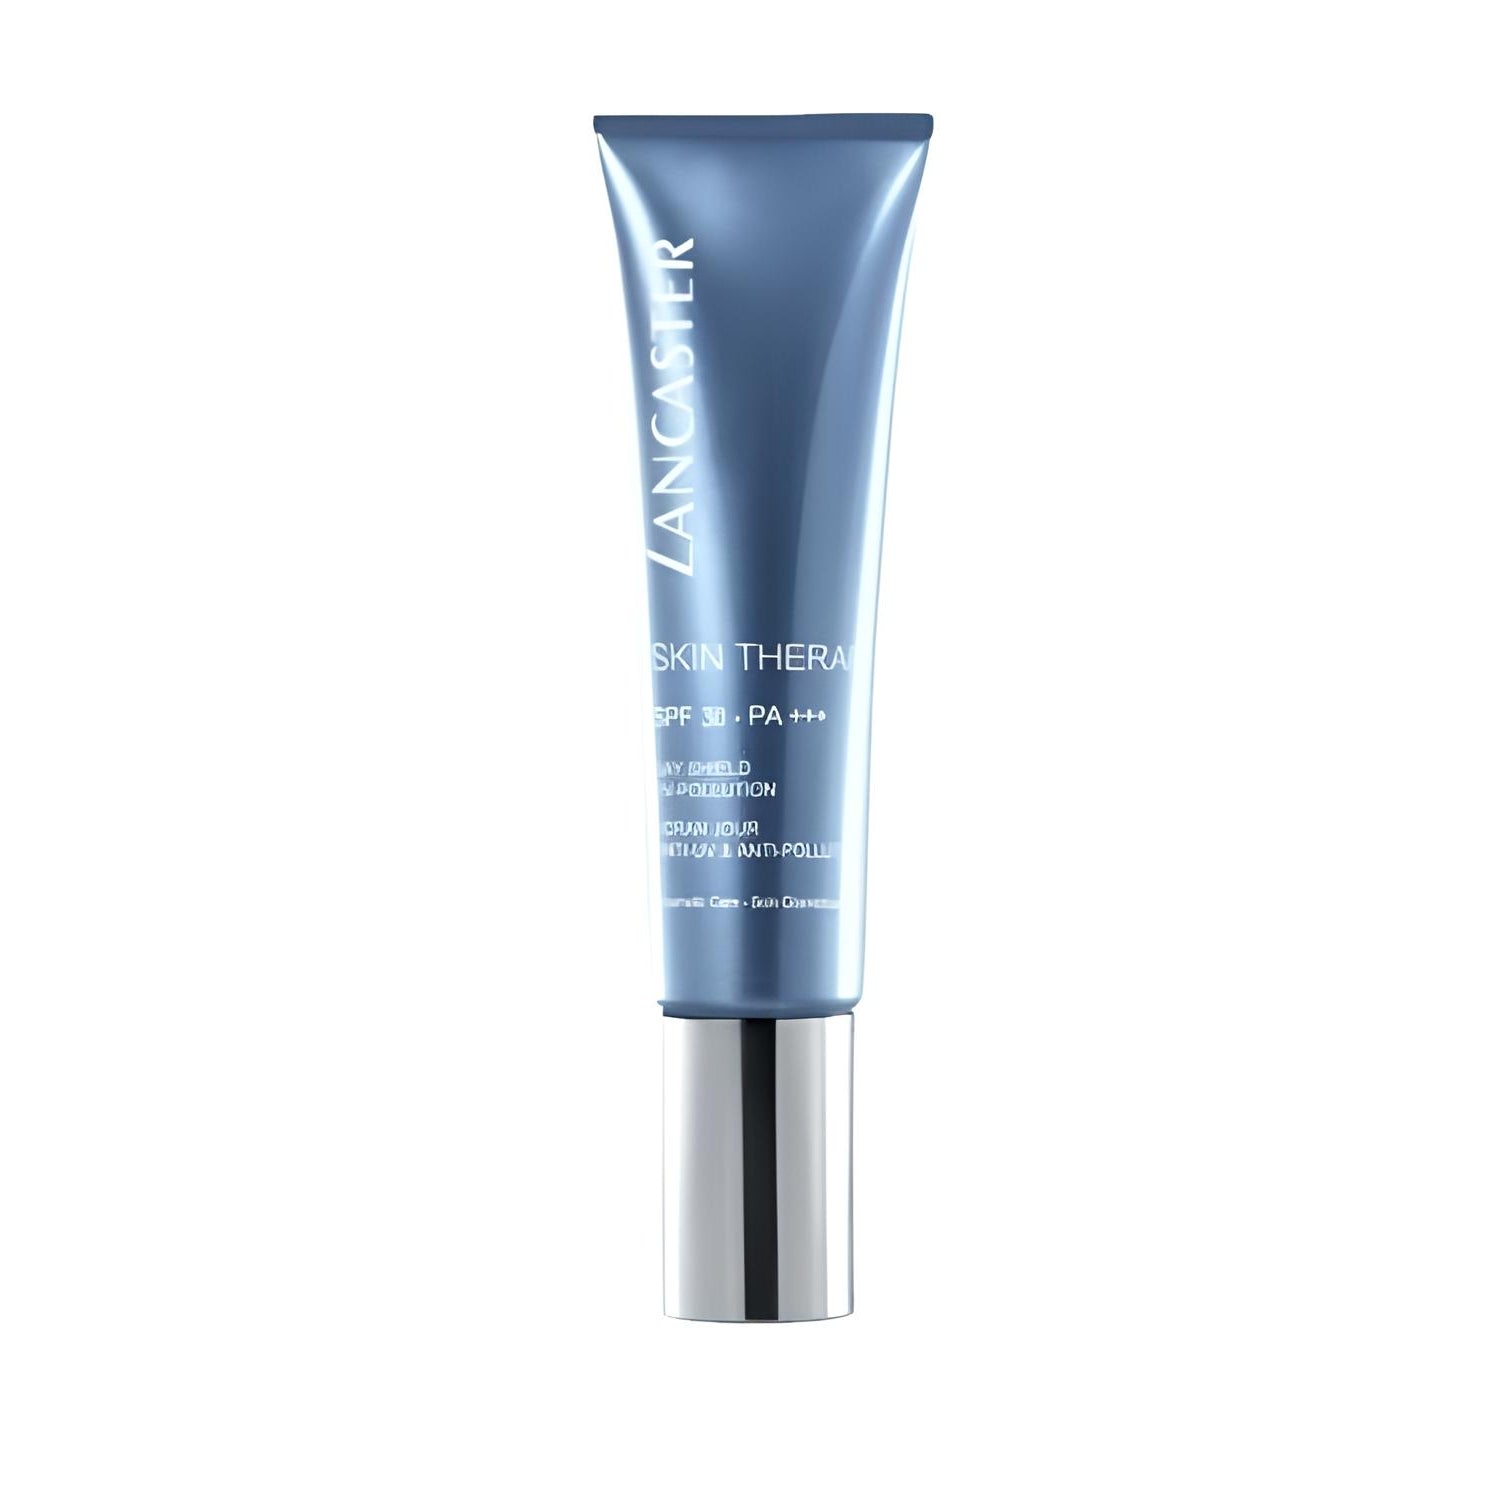 SKIN THERAPY daily sun protection SPF30